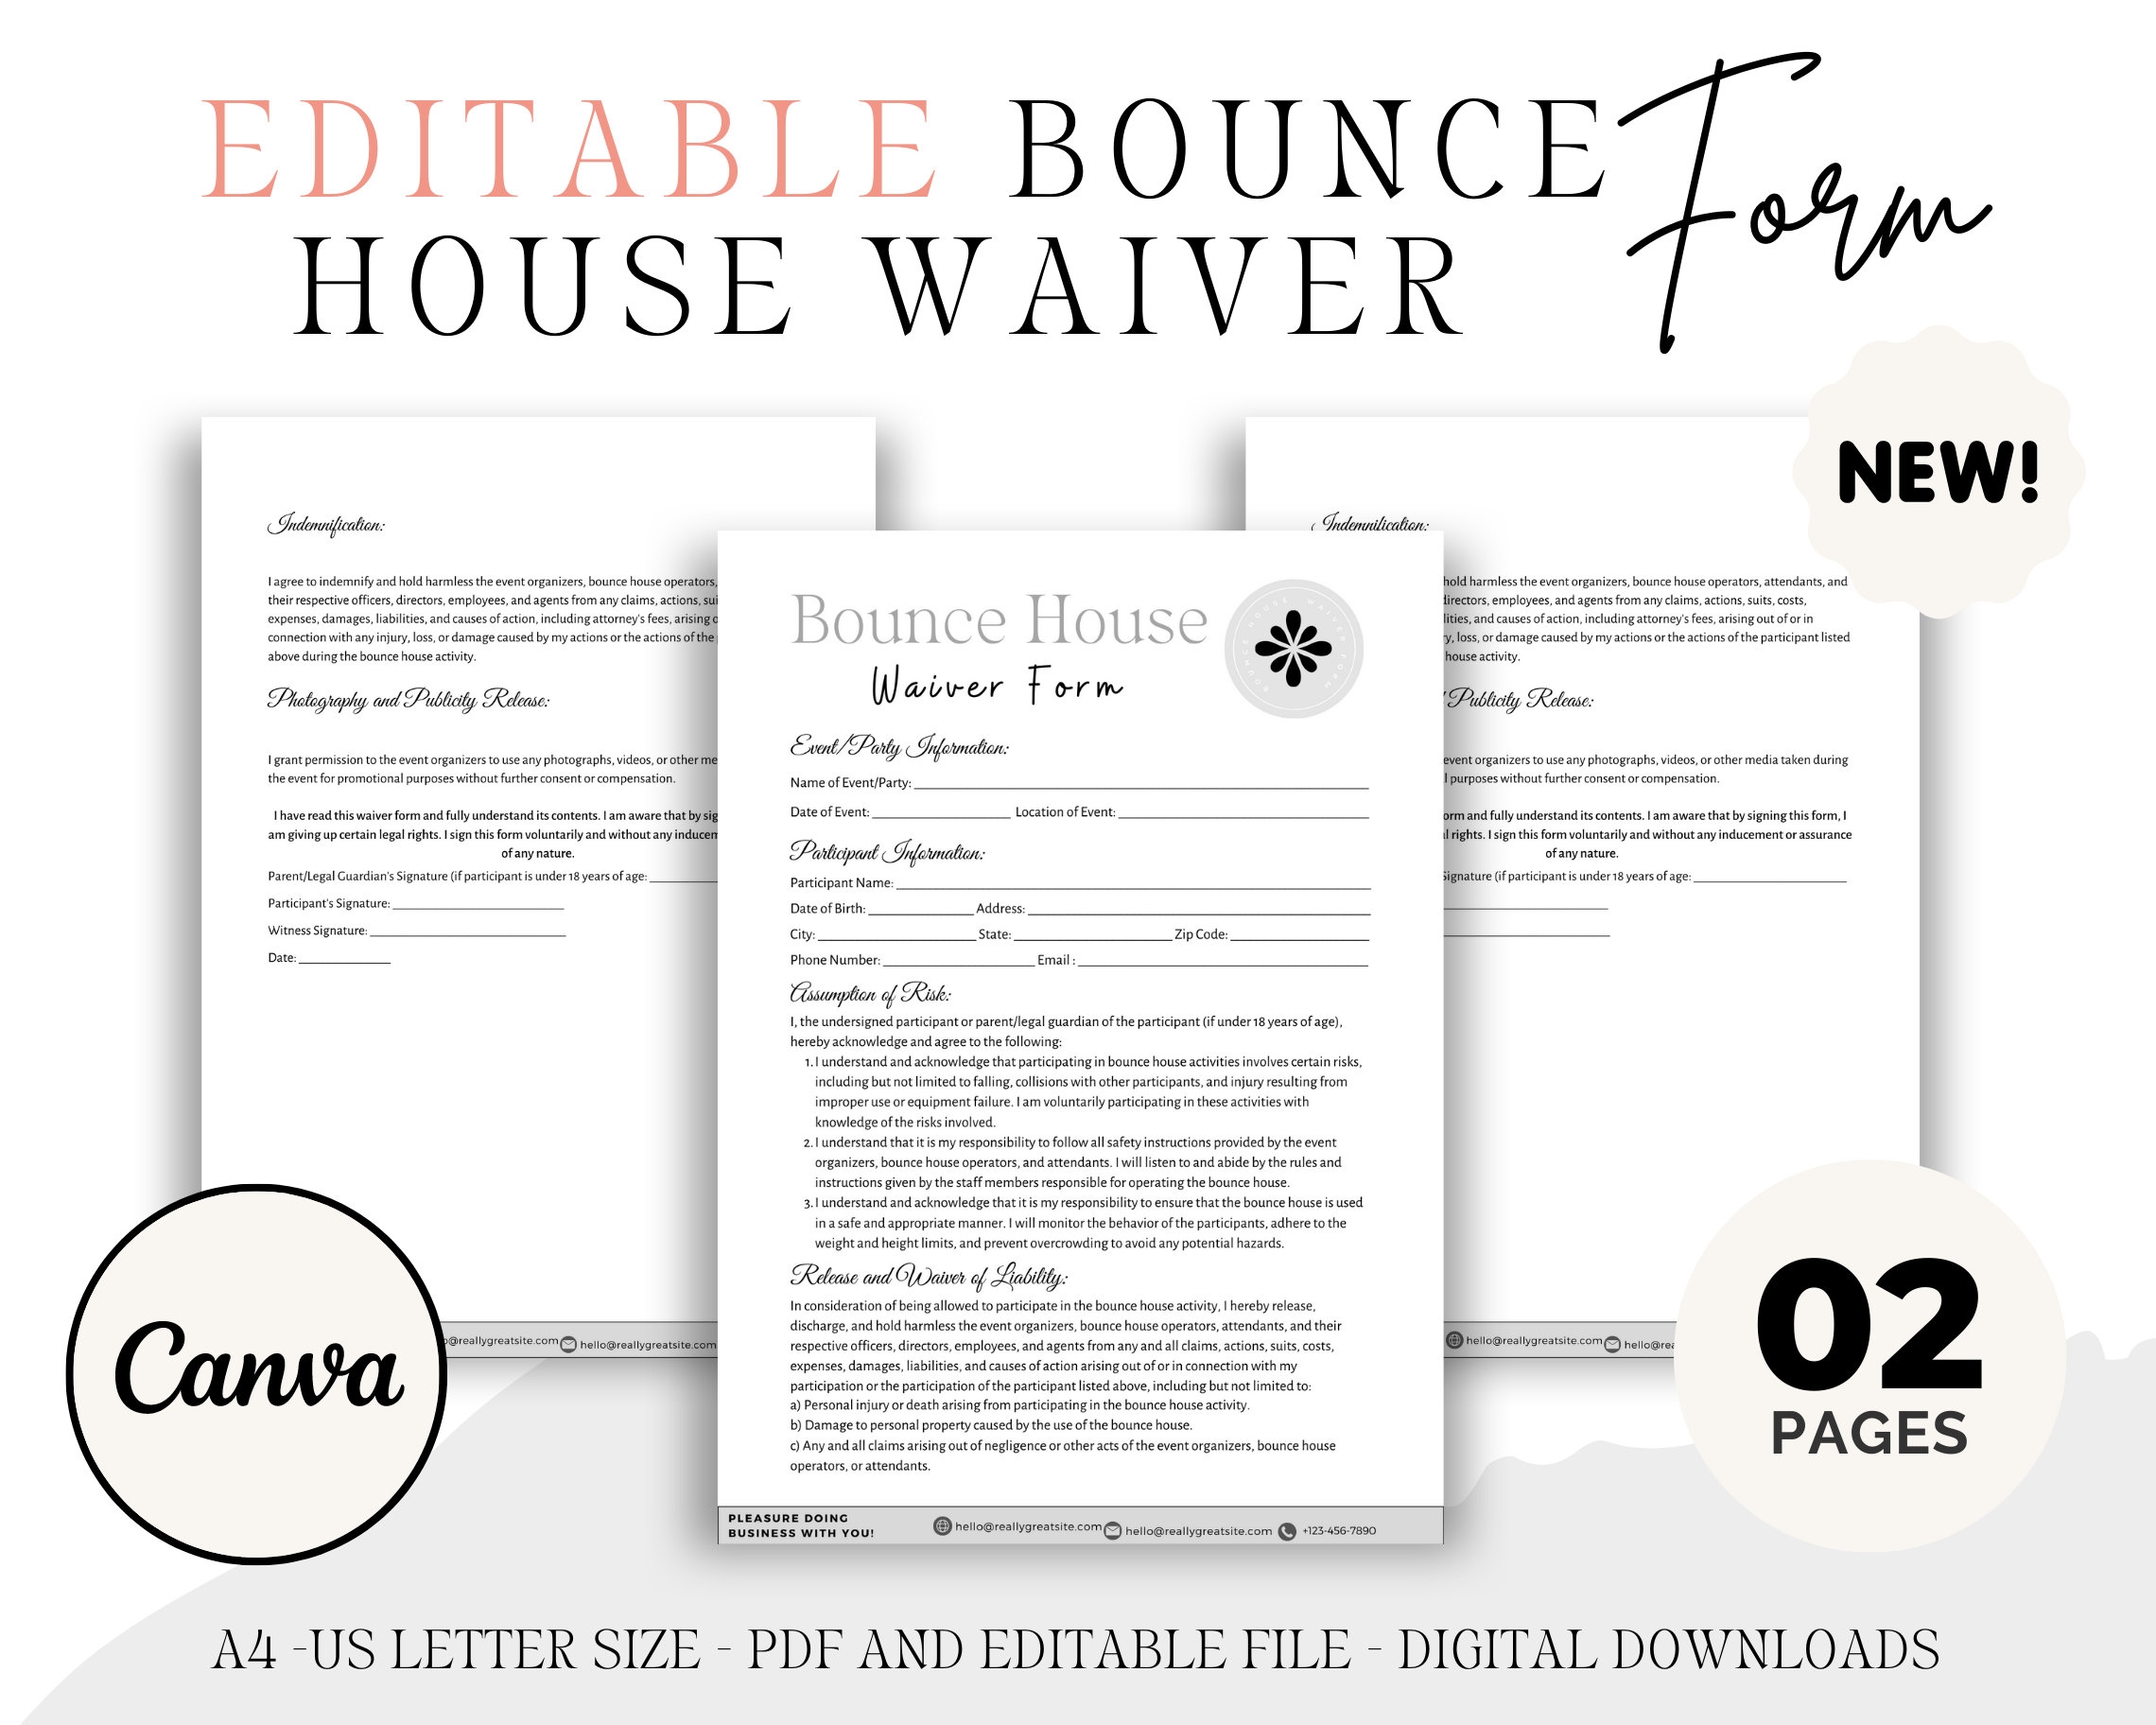 Editable Bounce House Waiver Of Liability Form Bounce House Rental Rental Agreement Inflatable Agreement Release Of Liability Waiver Etsy